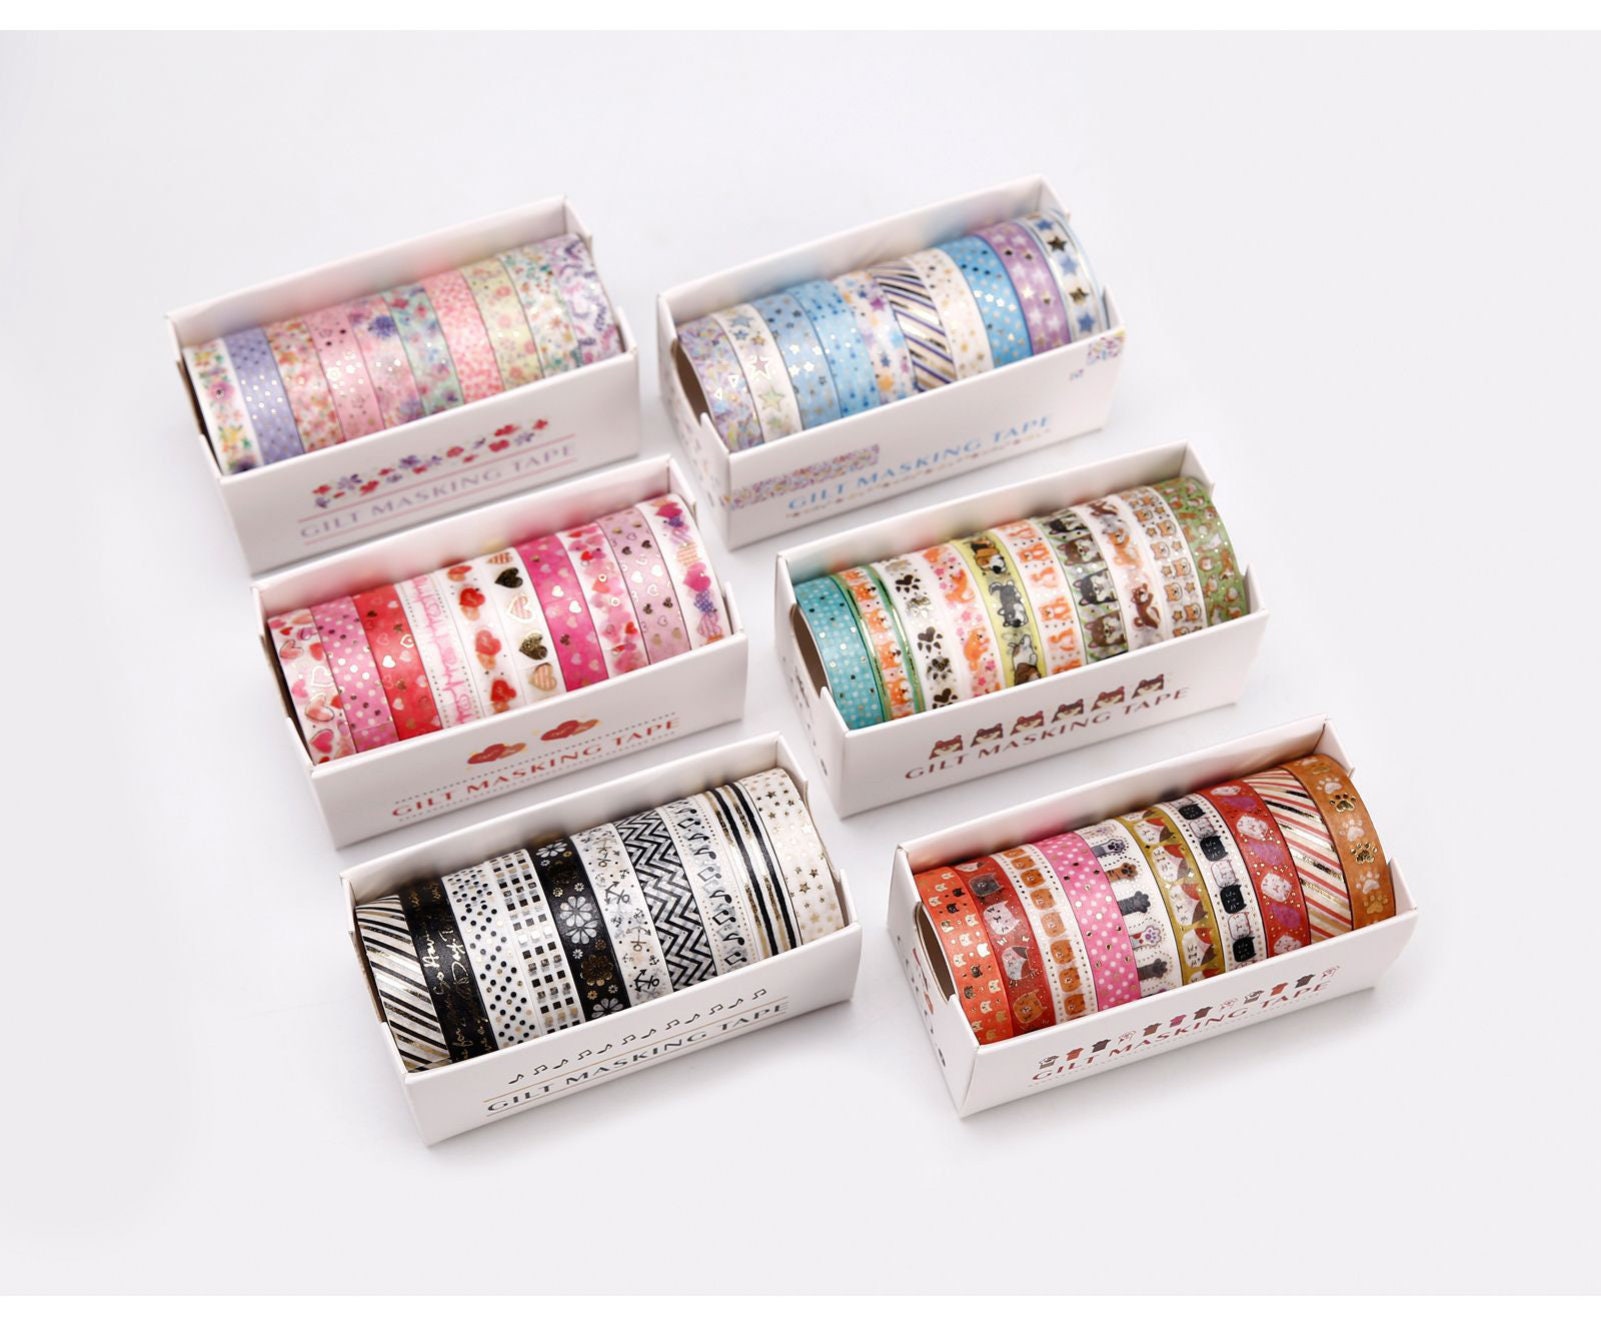 Set of 10 Washi Tape, Silver Foiled Set, Silver Accent Stars, Hearts, 8mm  X2m Each Roll, Thin Washi Tape Set, Junk Journal, Scrapbooking, 